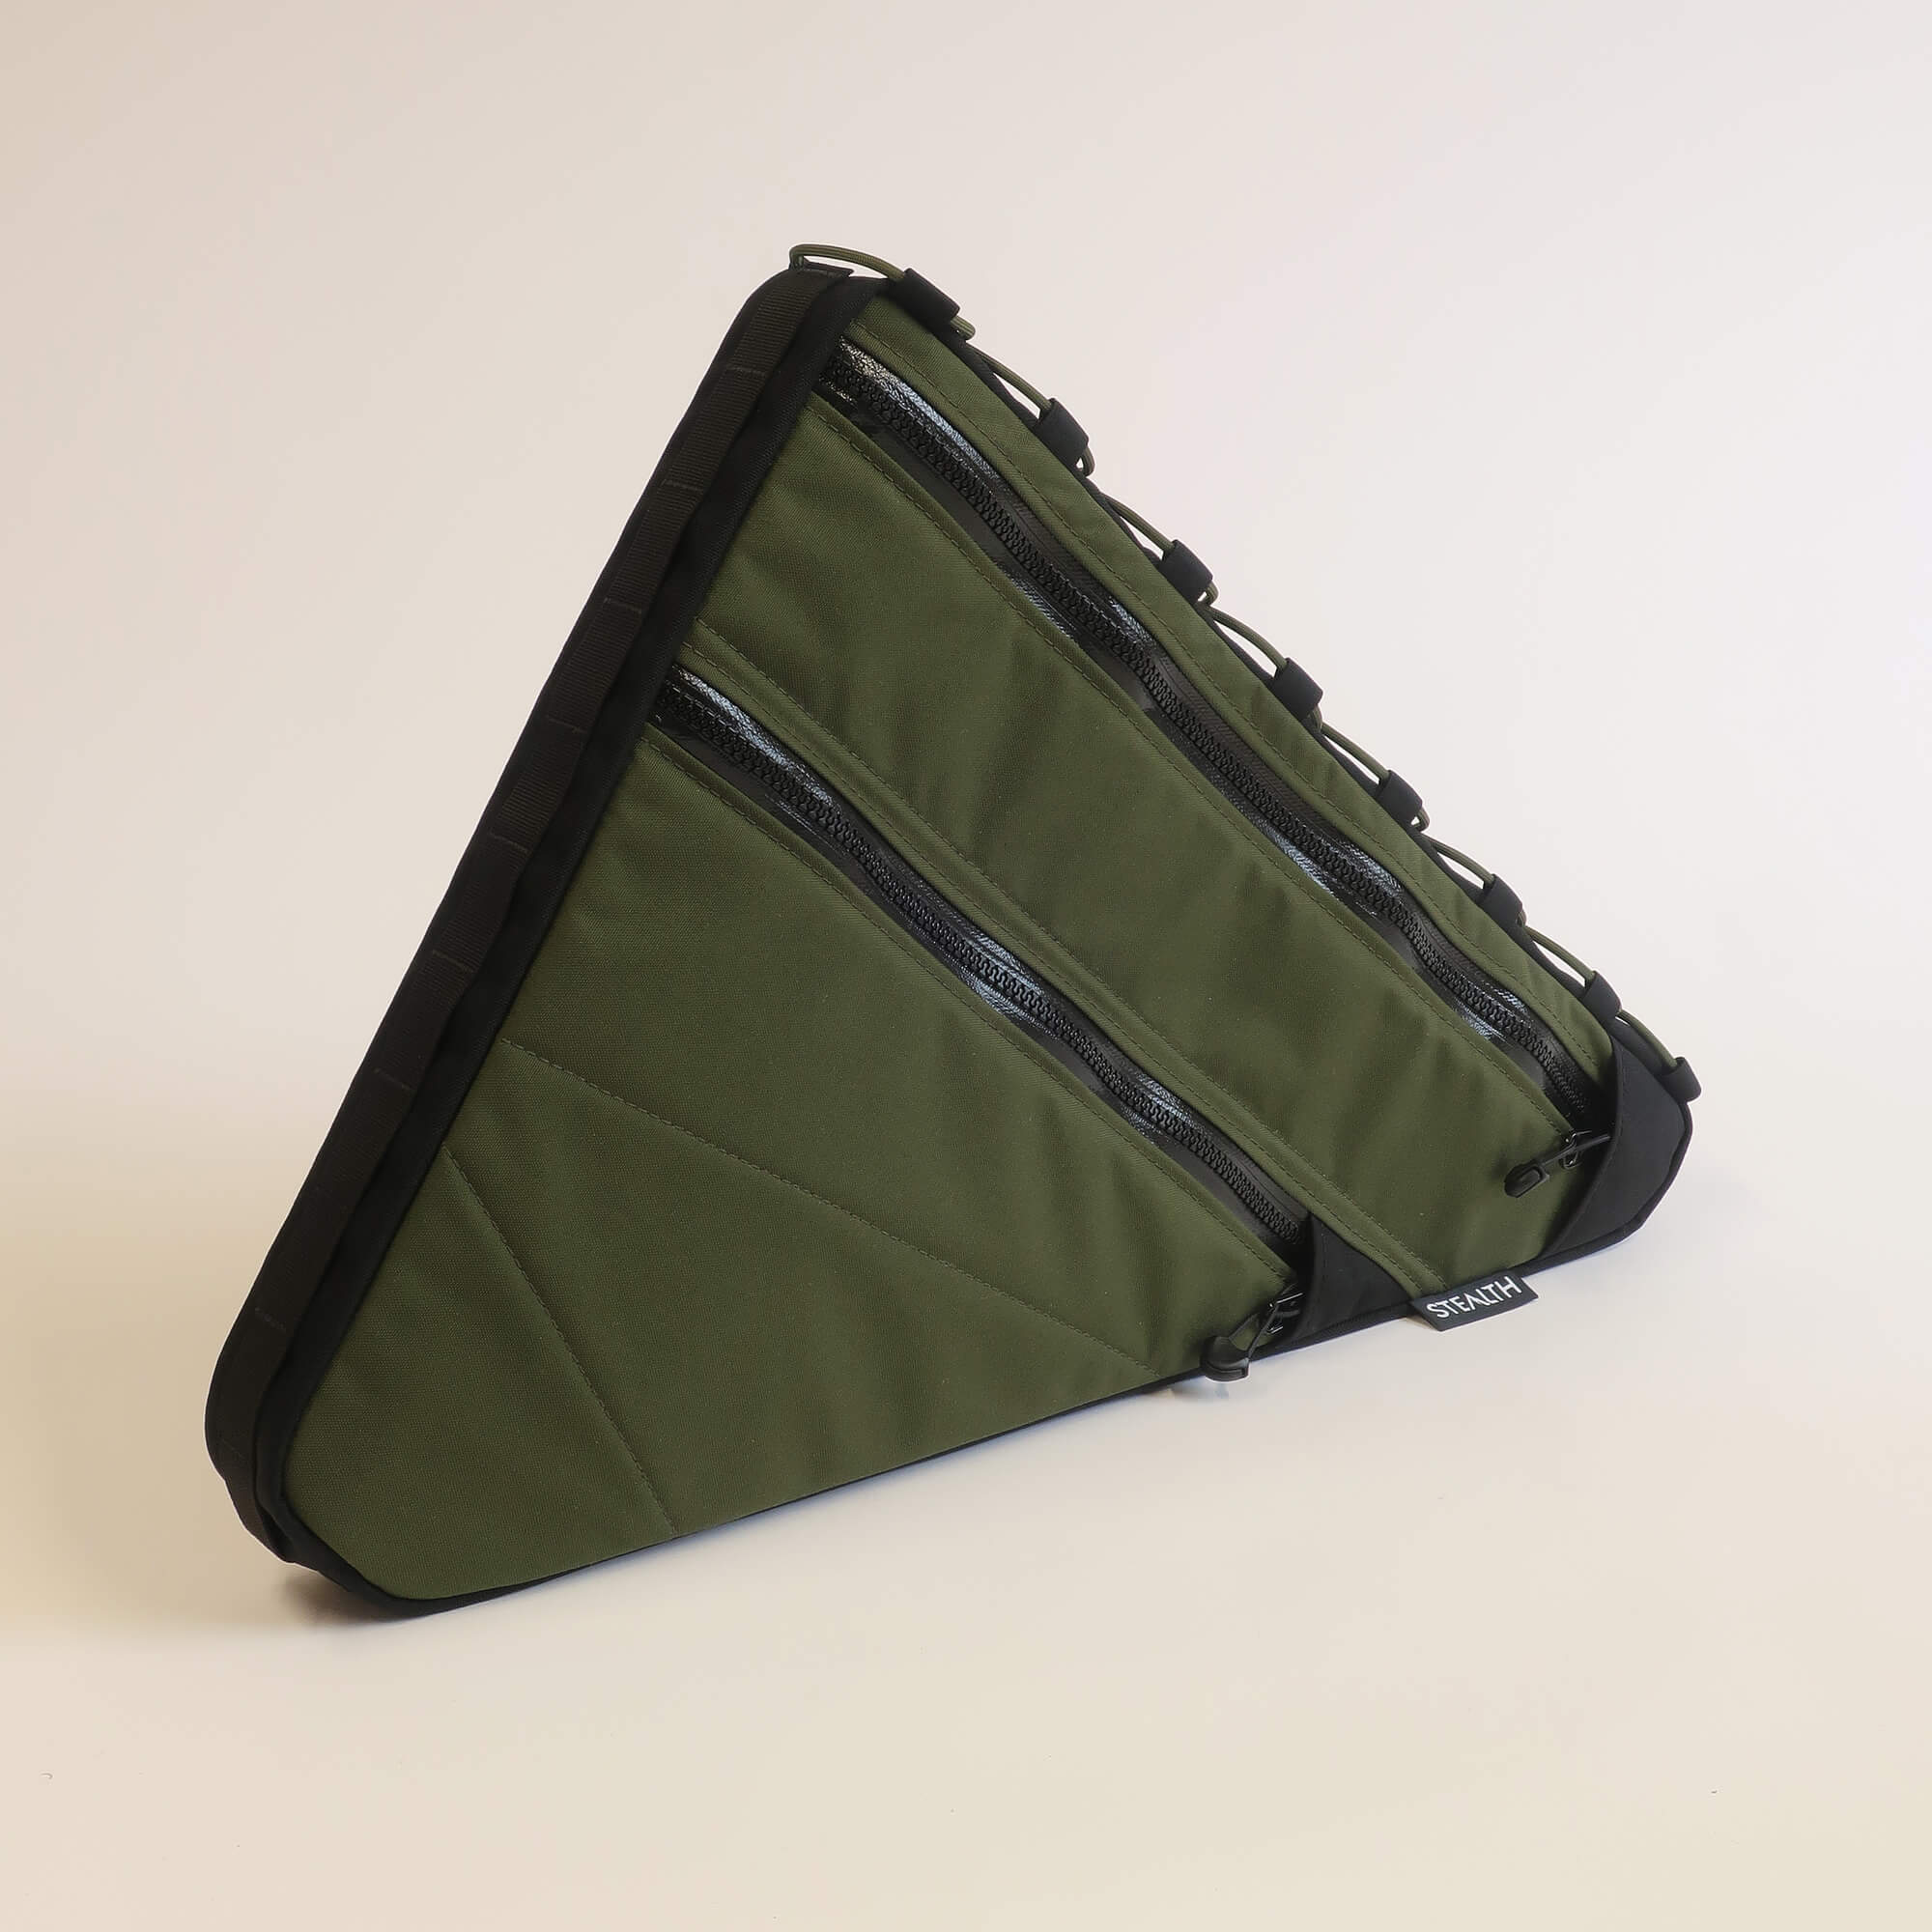 Olive full frame bag with lace up attachment